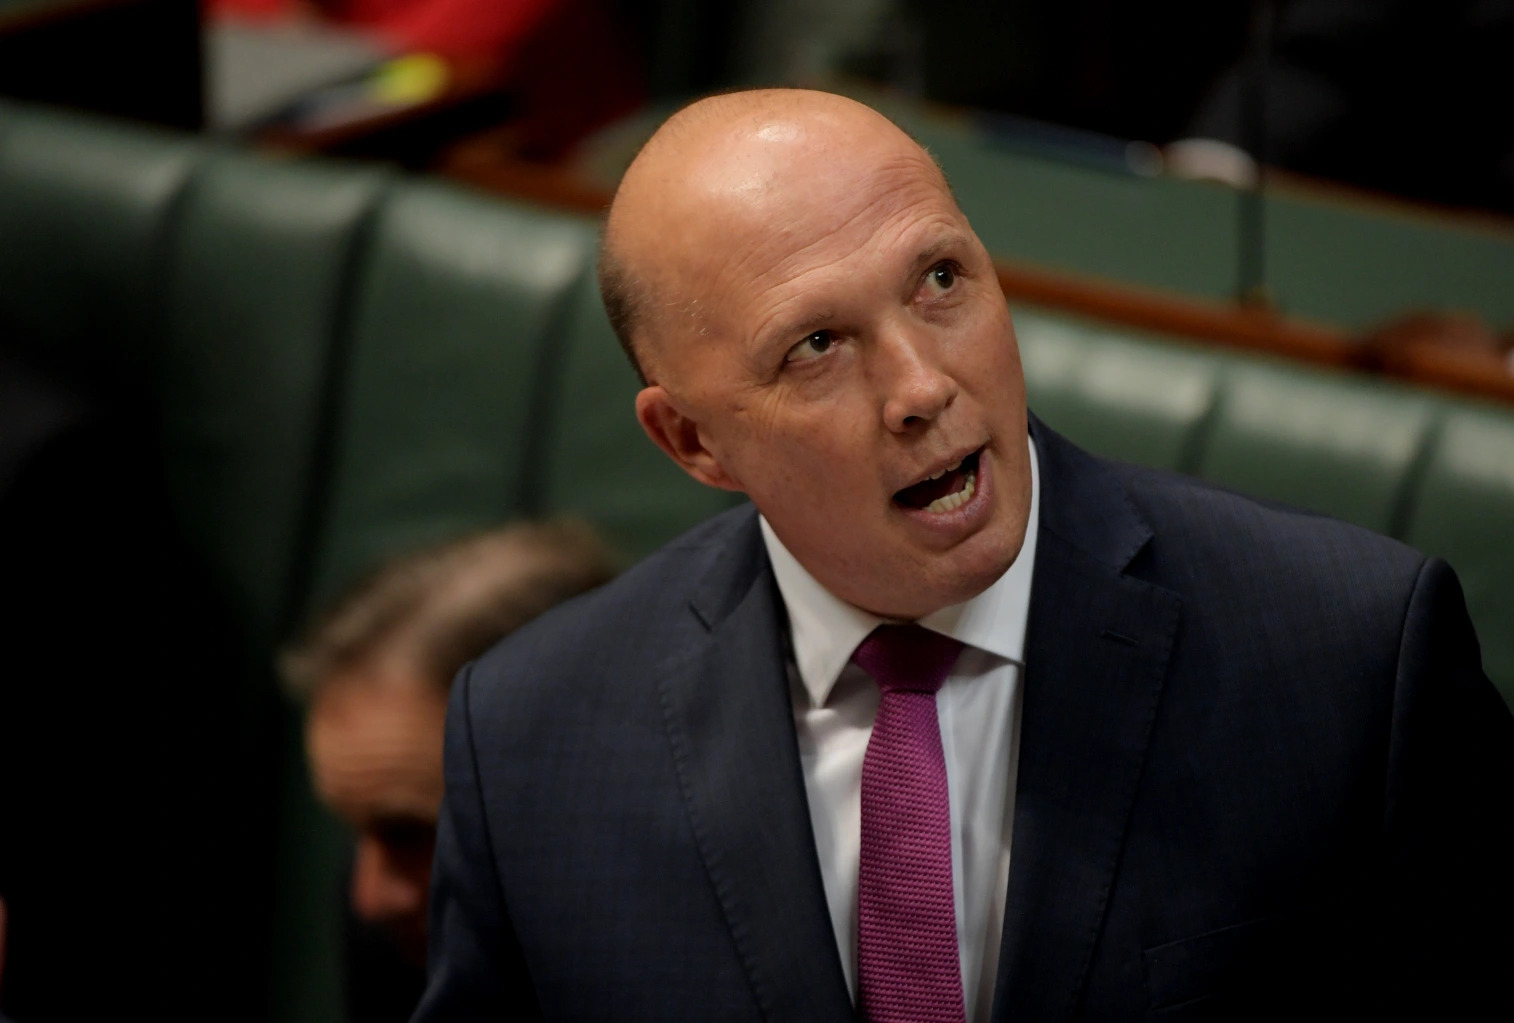 Australian Defence Minister Peter Dutton on Sunday reiterated Prime Minister Scott Morrison’s accusations that China has a history of bribing countries into signing bilateral agreements.